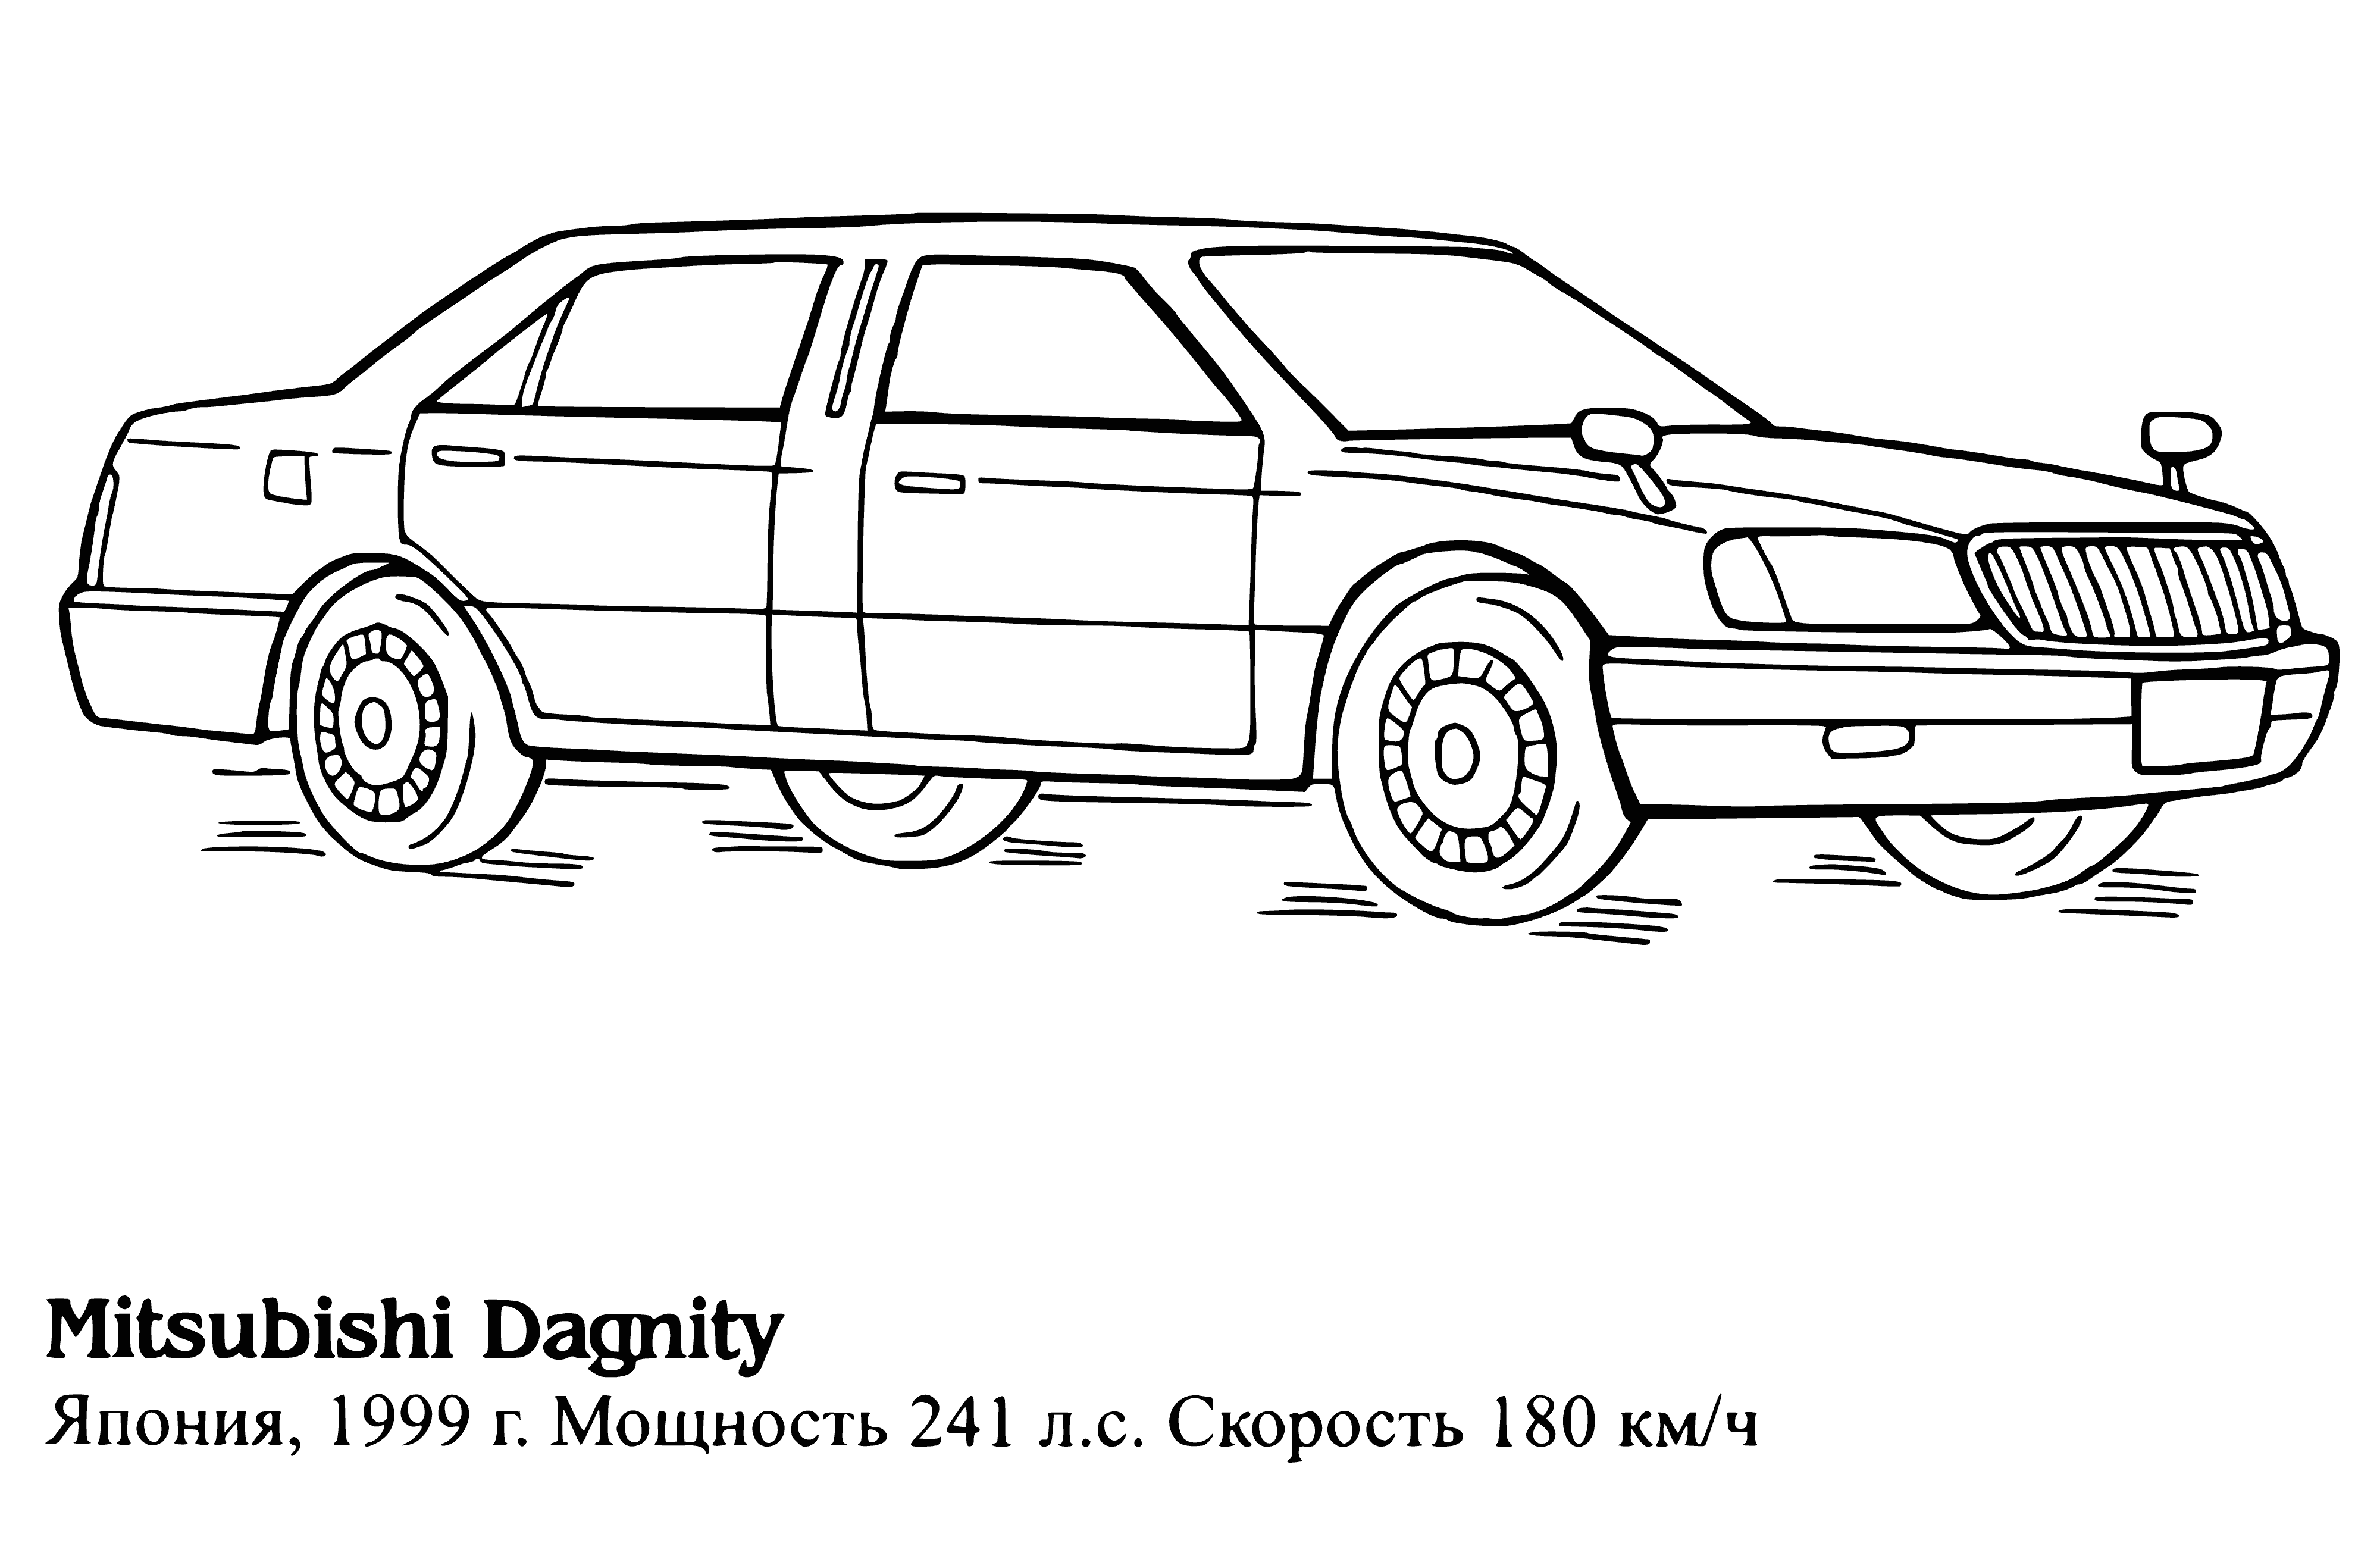 coloring page: Mitsubishi Dagnity: Long, sleek power and luxury. Glossy black body, rich dark leather interior. Demands attention and commands respect.